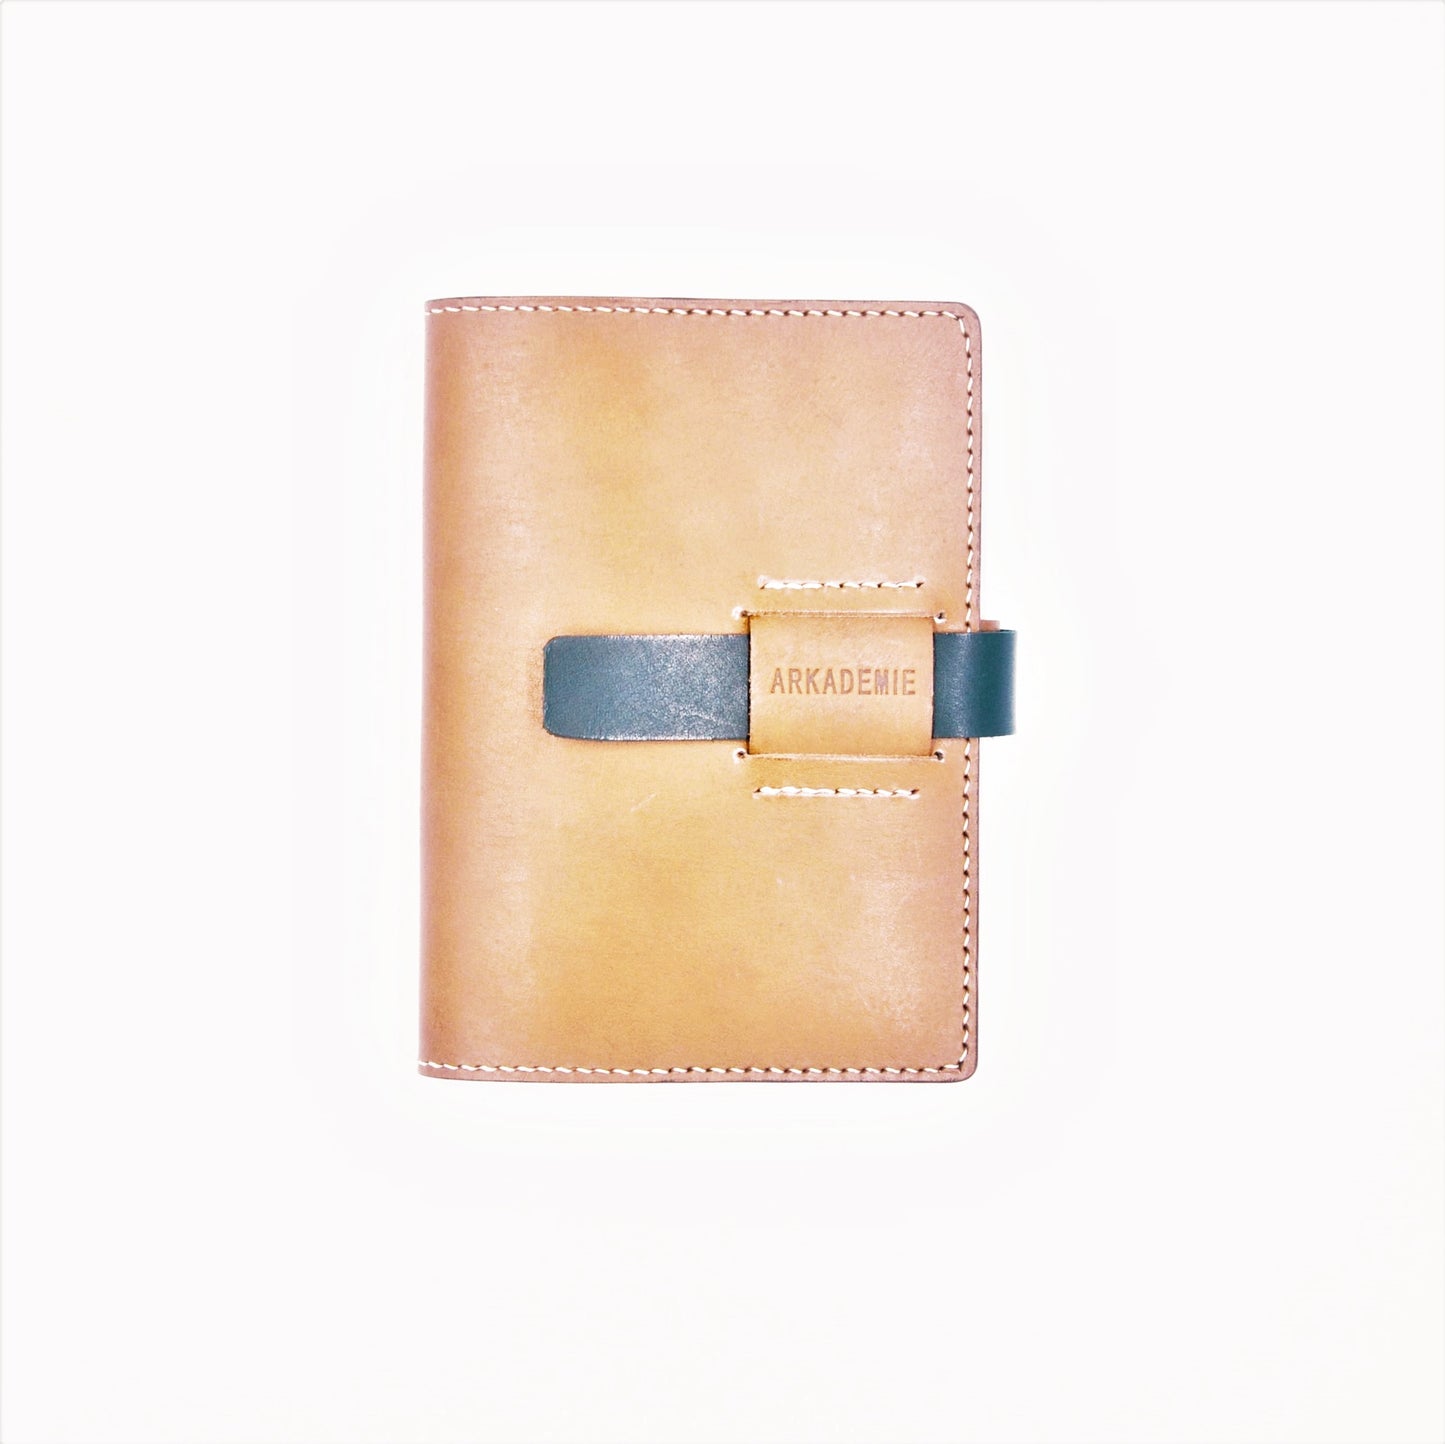 HERITAGE A6-P Leather Notebook Cover Duo-Tone